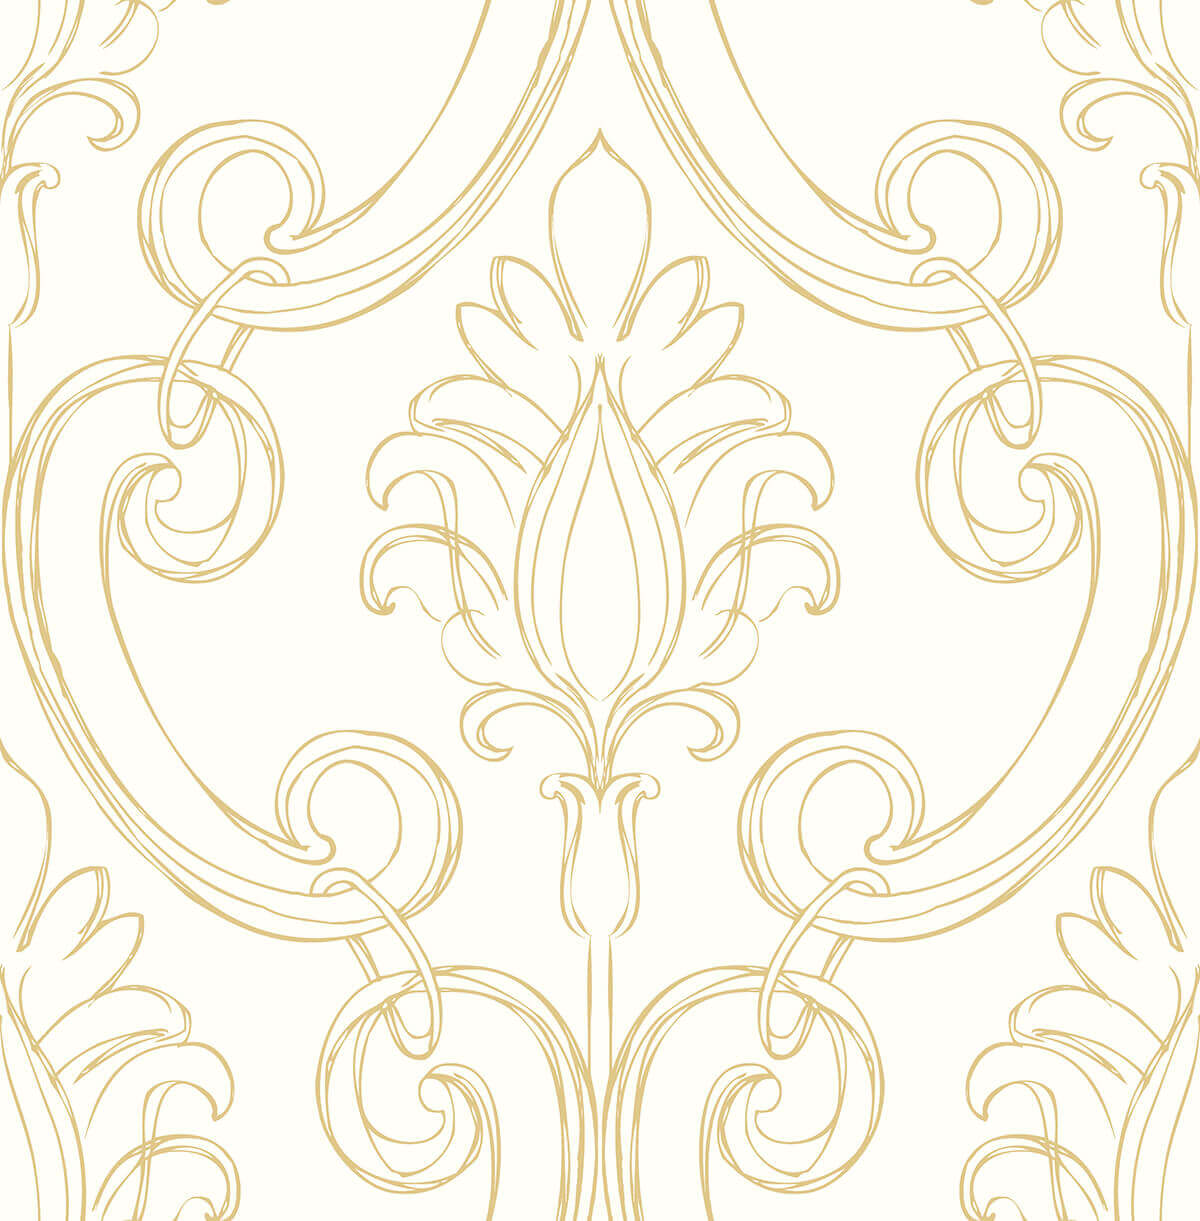 NextWall Sketched Damask Peel and Stick Wallpaper - SAMPLE